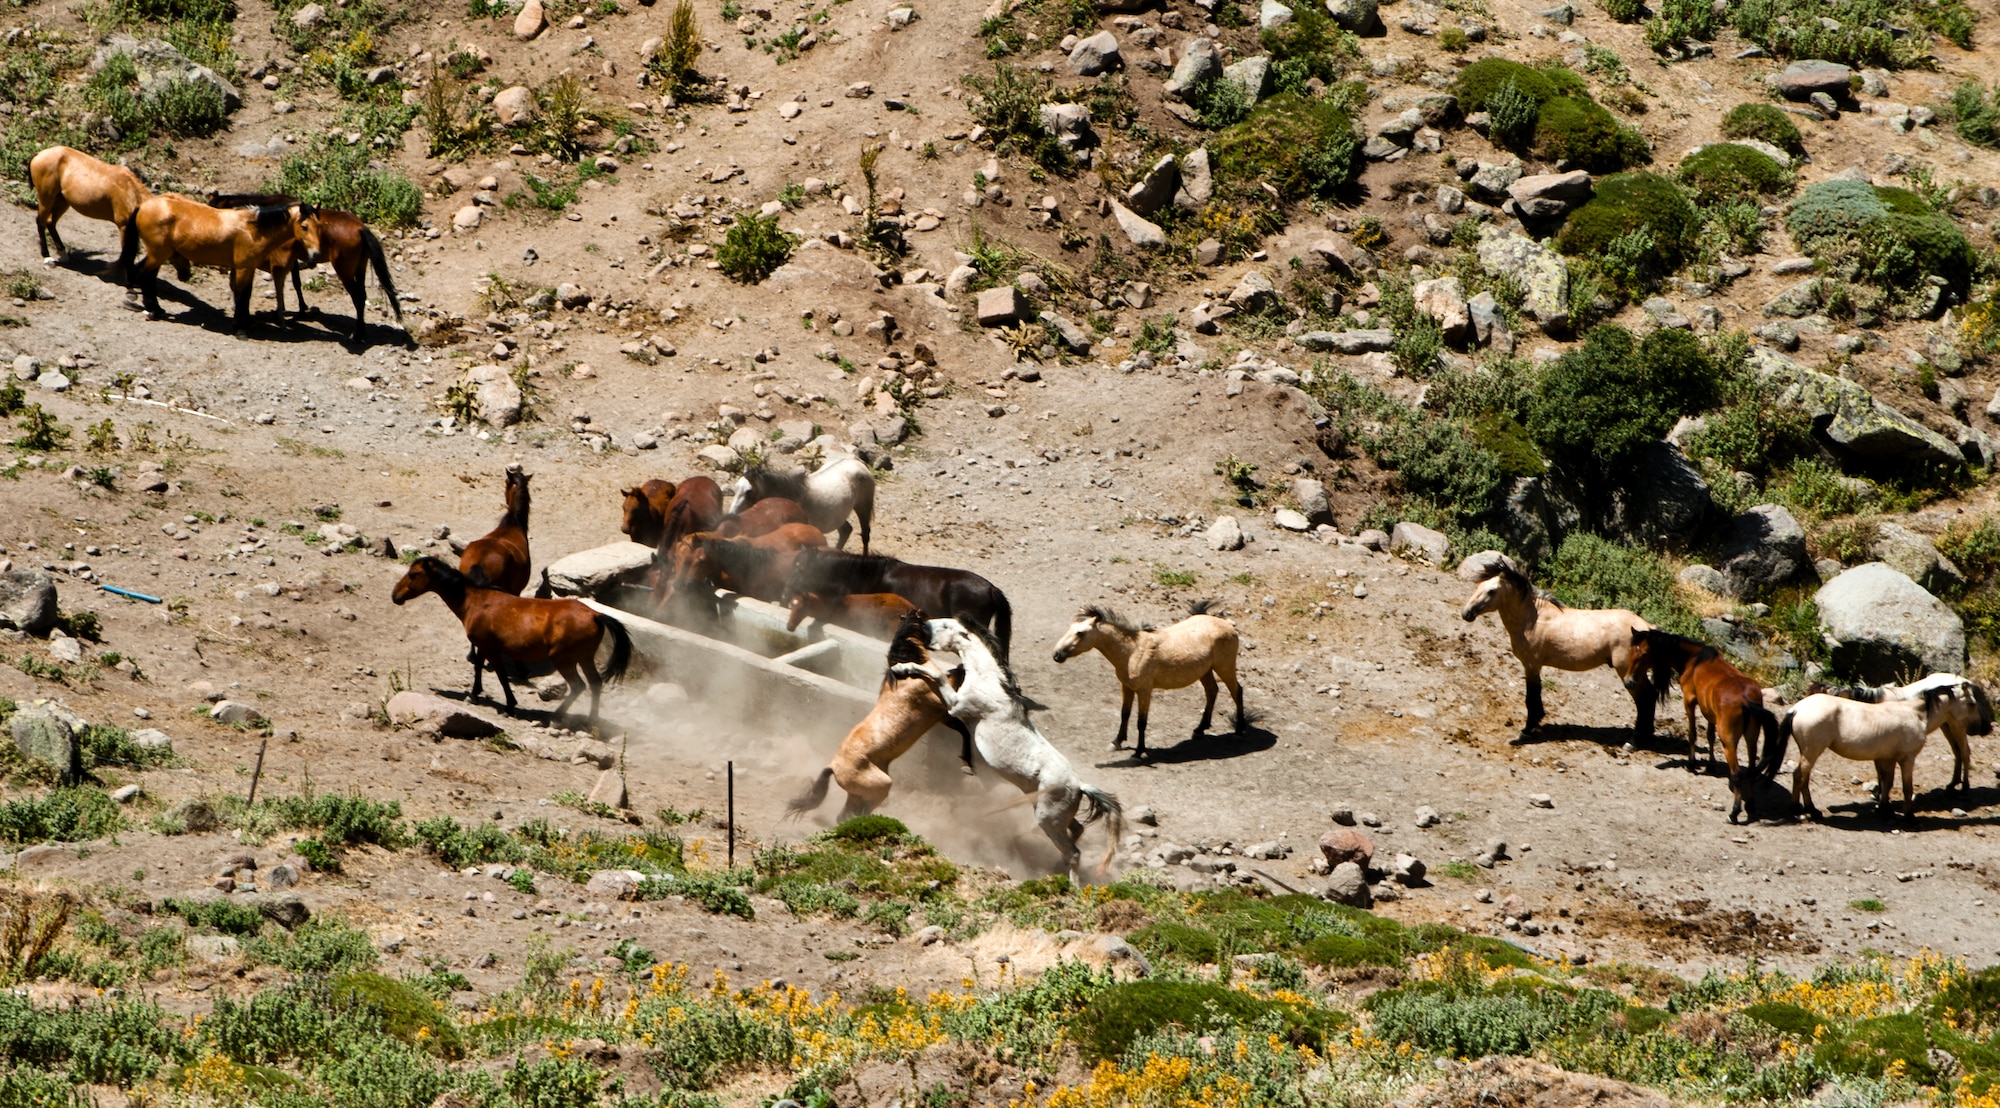 Wild horses fight June 31, 2013, Karaman province, Turkey.  Though the horses are wild, they are under protection of the Turkish government. (U.S. Air Force photo by Senior Airman Daniel Phelps/Released)